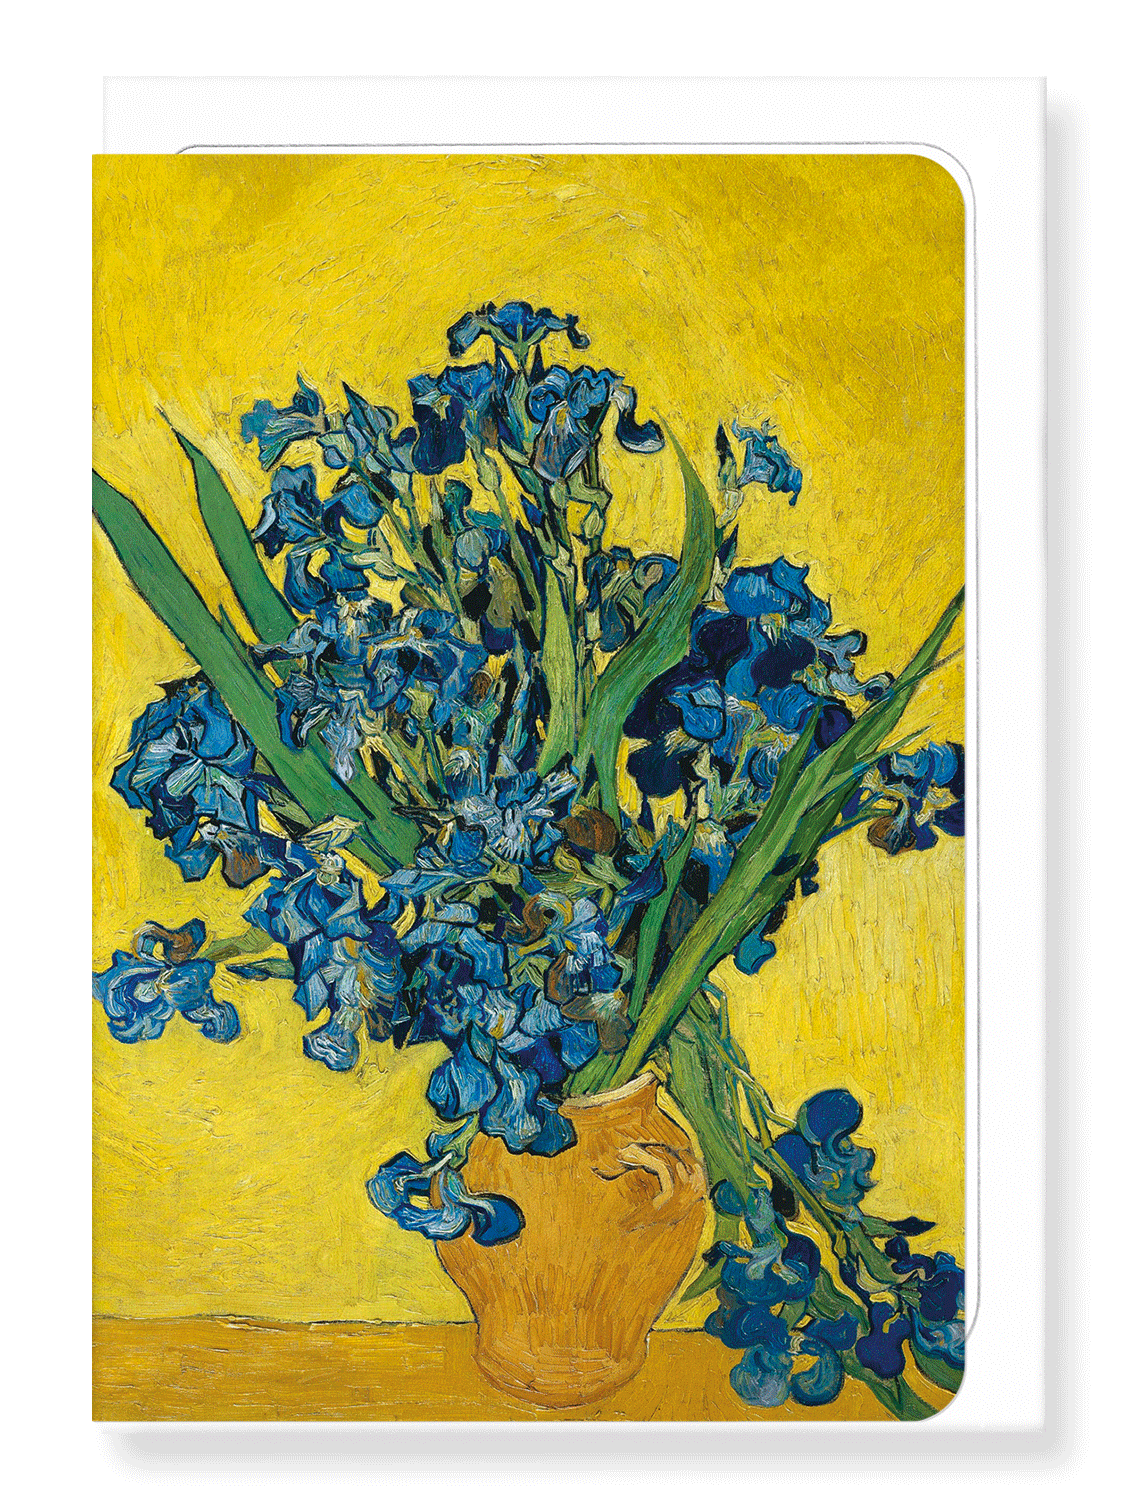 Ezen Designs - Vase with irises by van gogh - Greeting Card - Front